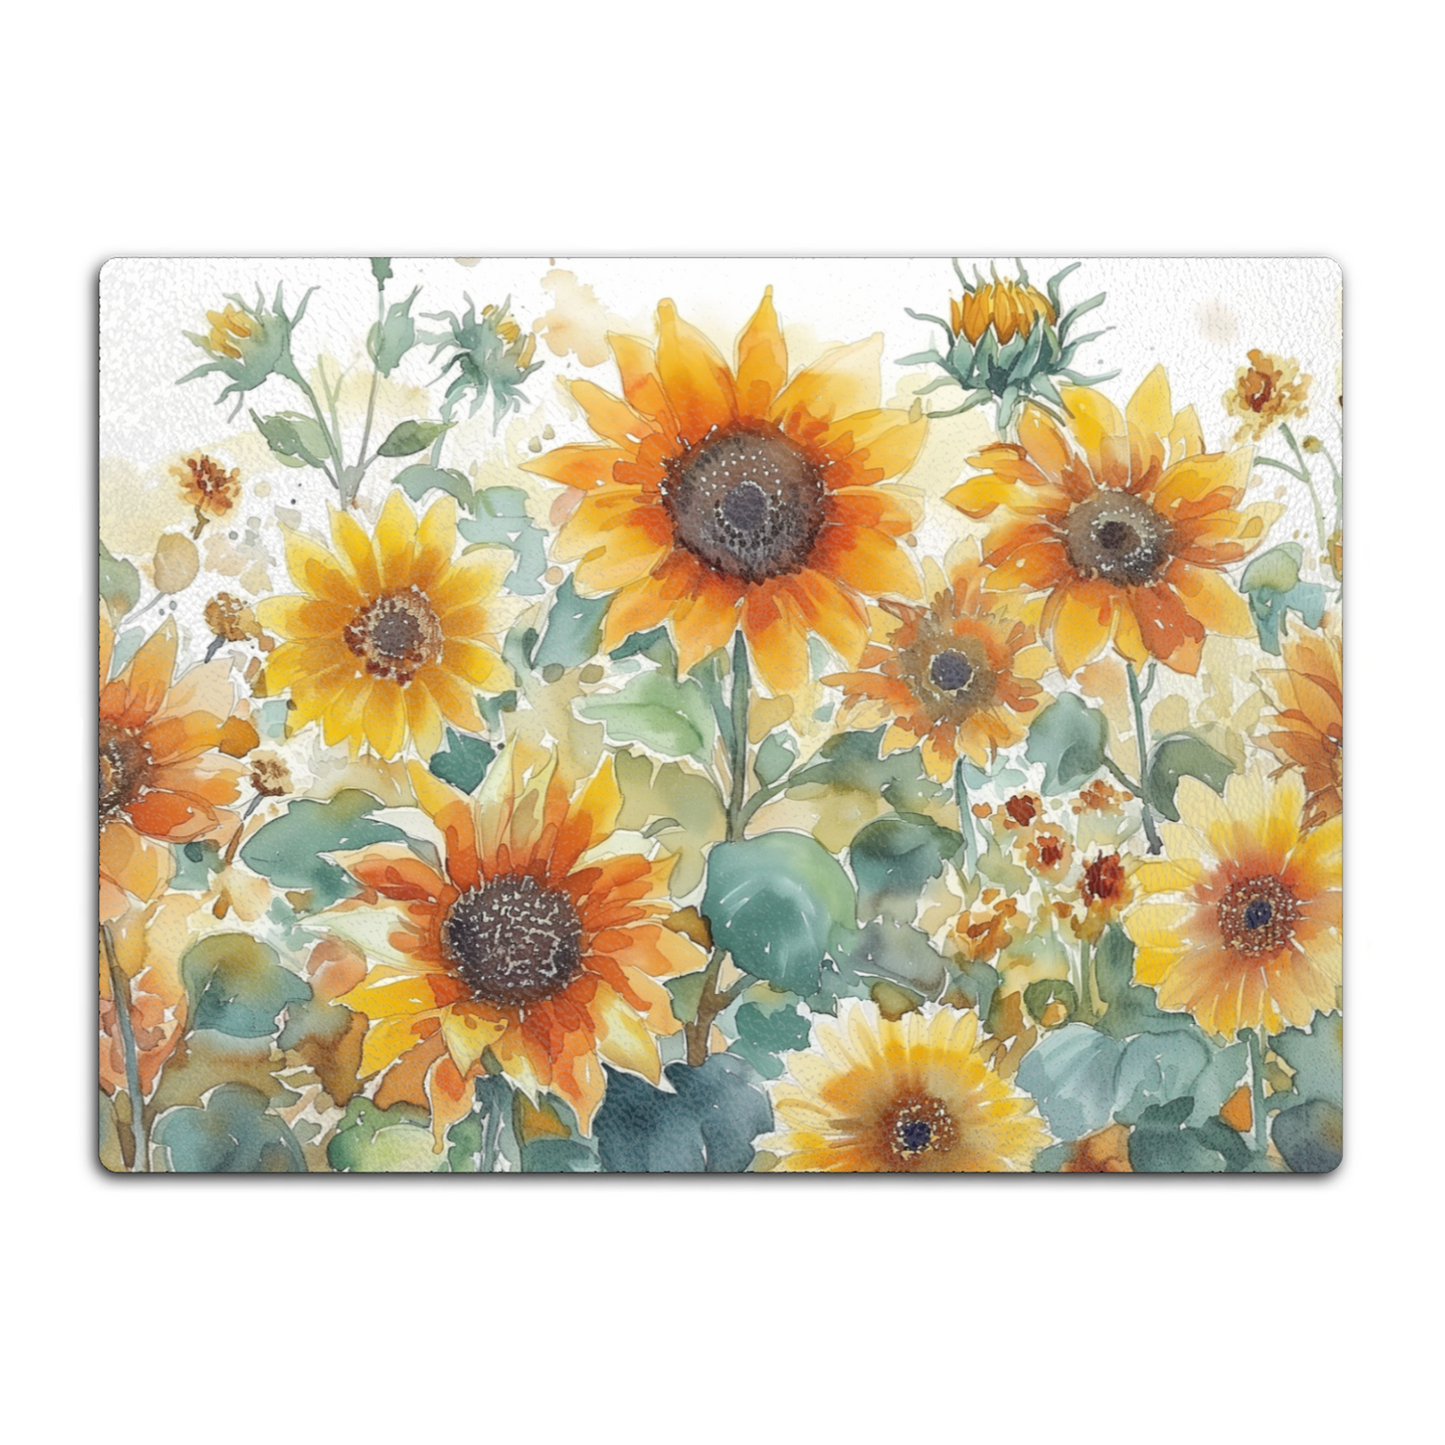 Sunflowers Counter Art, Heat Tolerant Tempered Glass Cutting Board 15” x 11” Made in the USA